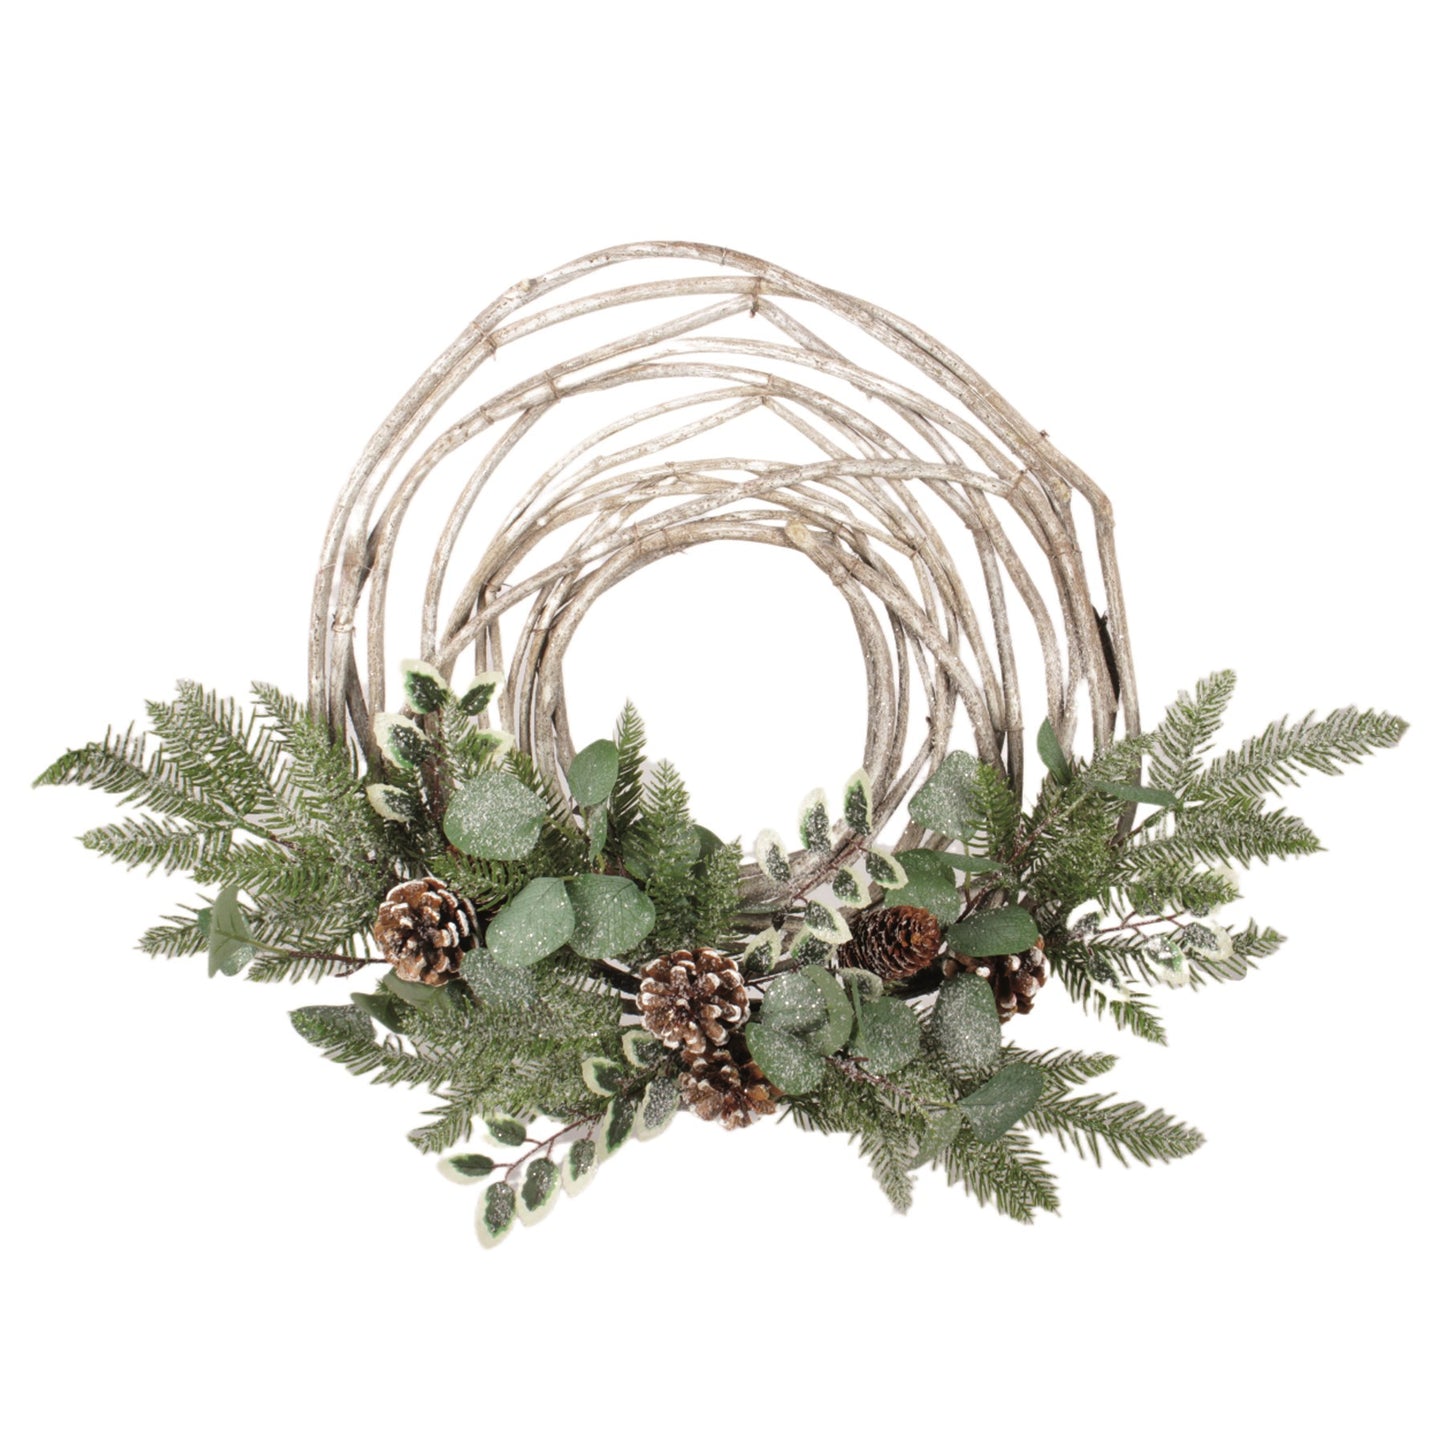 Twig Wreath with Mixed Greens